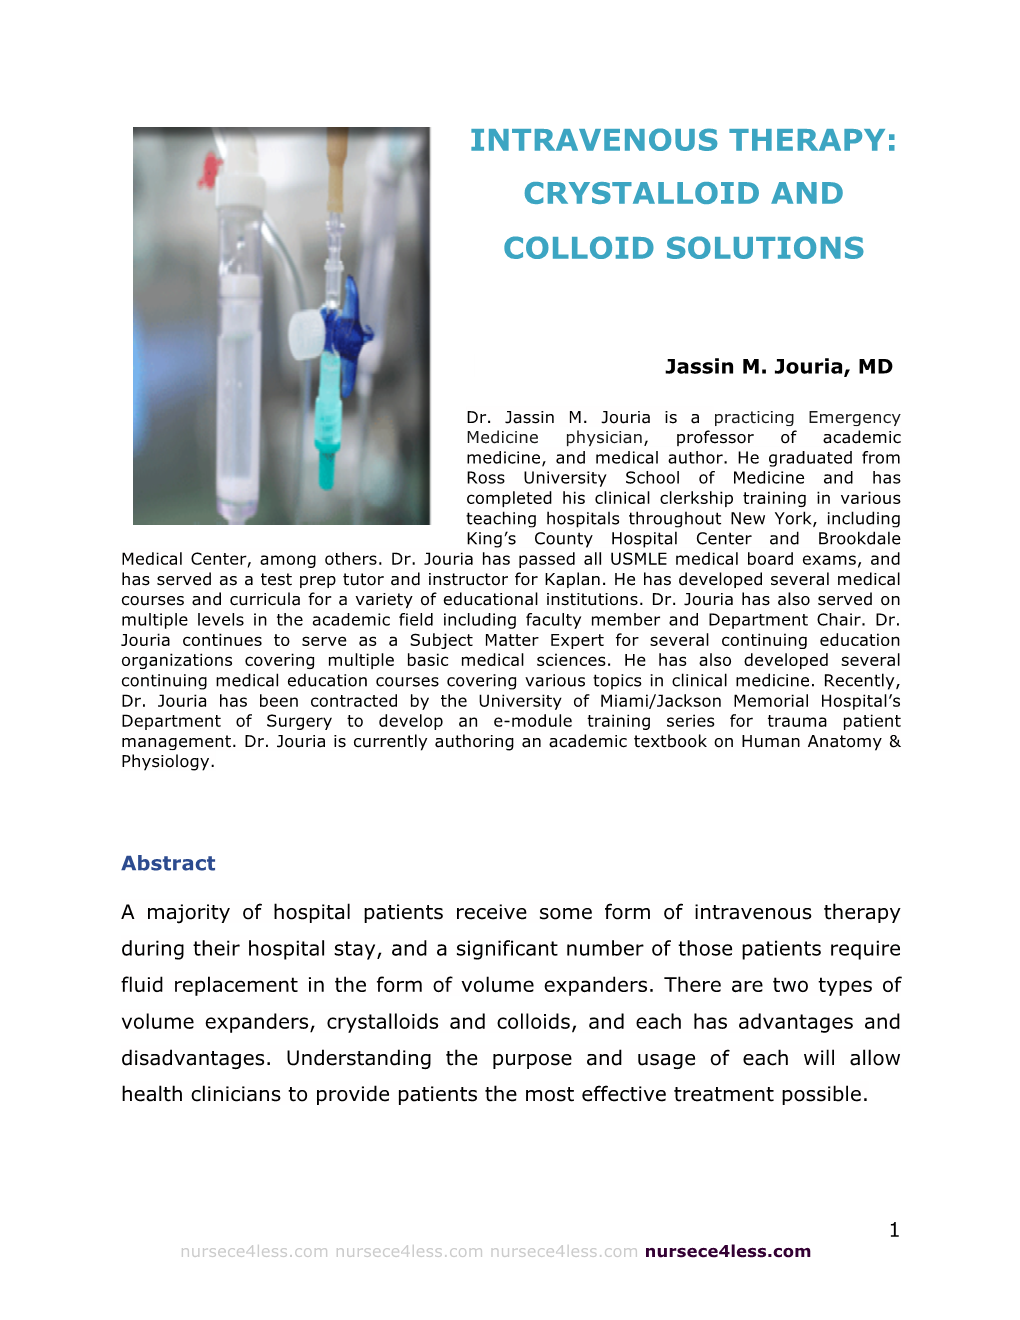 Intravenous Therapy: Crystalloid and Colloid